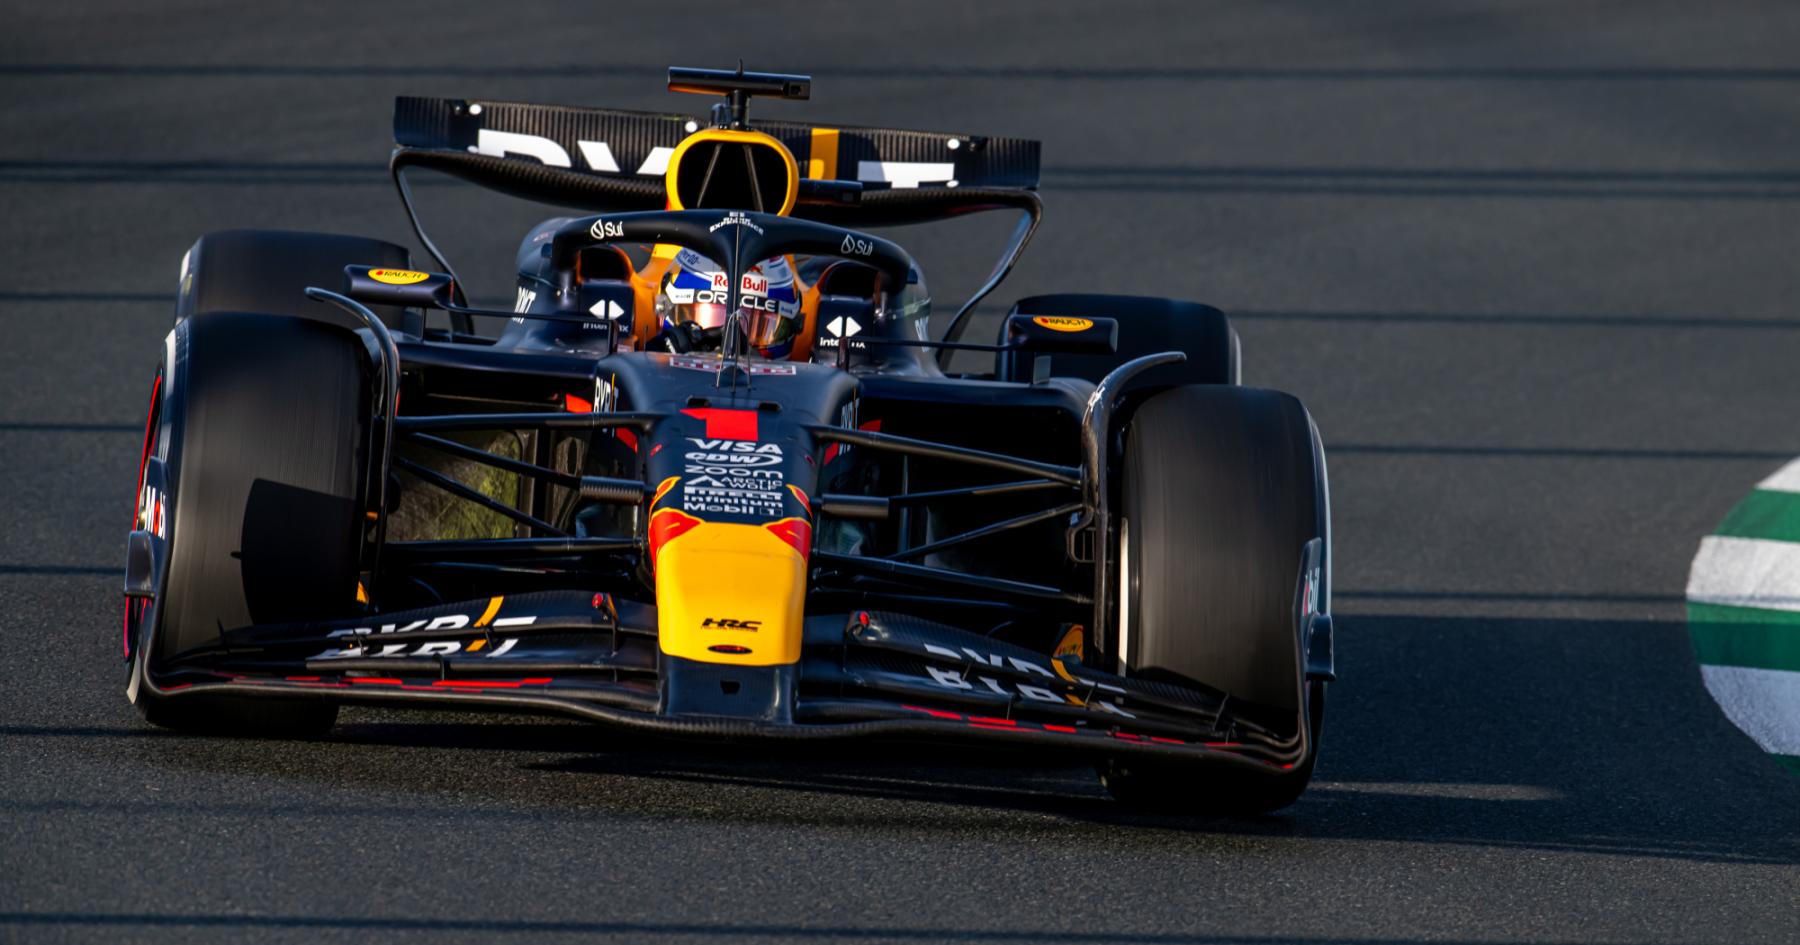 The data that shows Red Bull's true Saudi Arabia pace